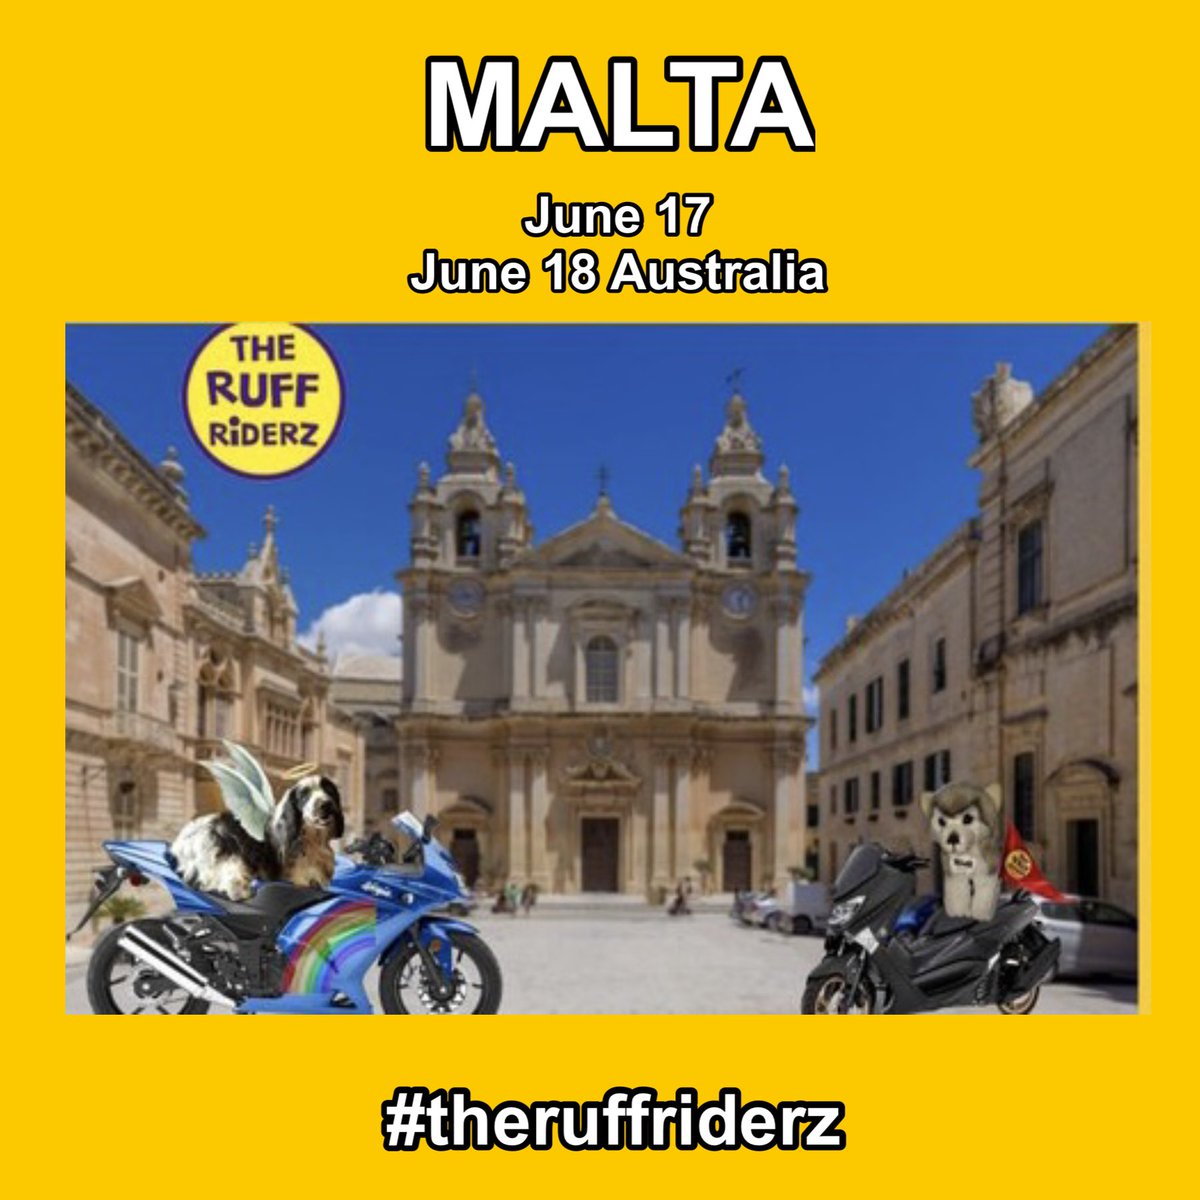 #theruffriderz are going to Malta! There will be team leaders to help with Avis or contact @carrotfiles 

@Nani_n_Sully⁩
@bertie_of
@Rwilk21⁩
@coopers_pr_mom
@awendyburnham

@Mark_99nc 
@mcleodchristy21  
@caninemomcaren1
@TrixieBell28    
@trumanbuster